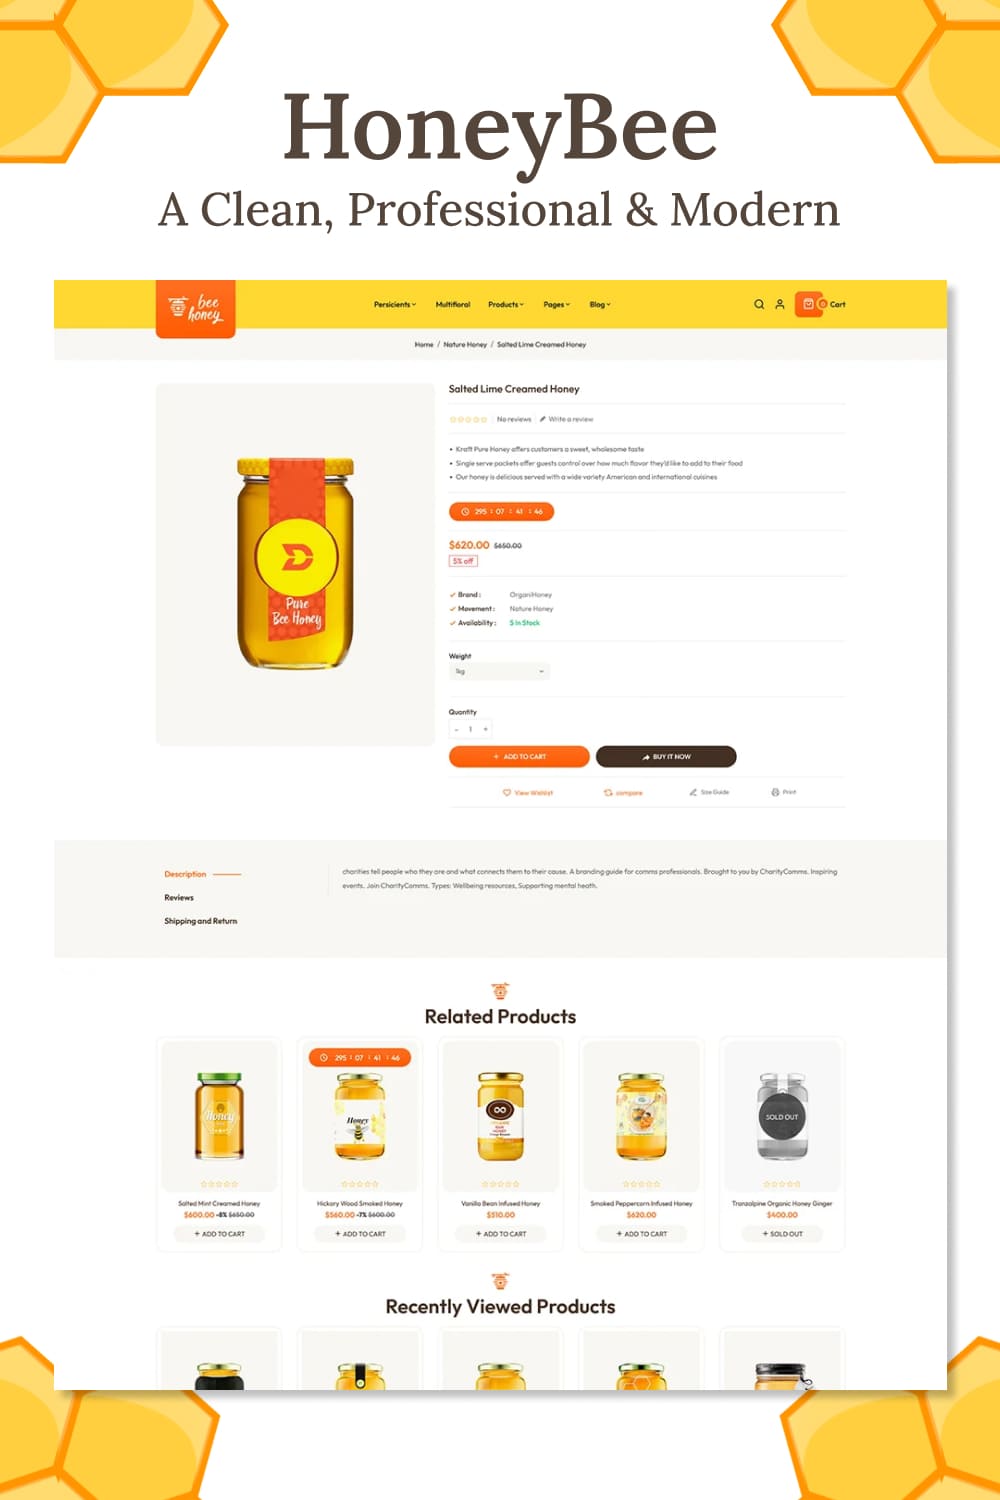 Honeybee a clean professional modern shopify OS 2.0 responsive theme, picture for pinterest 1000x1500.